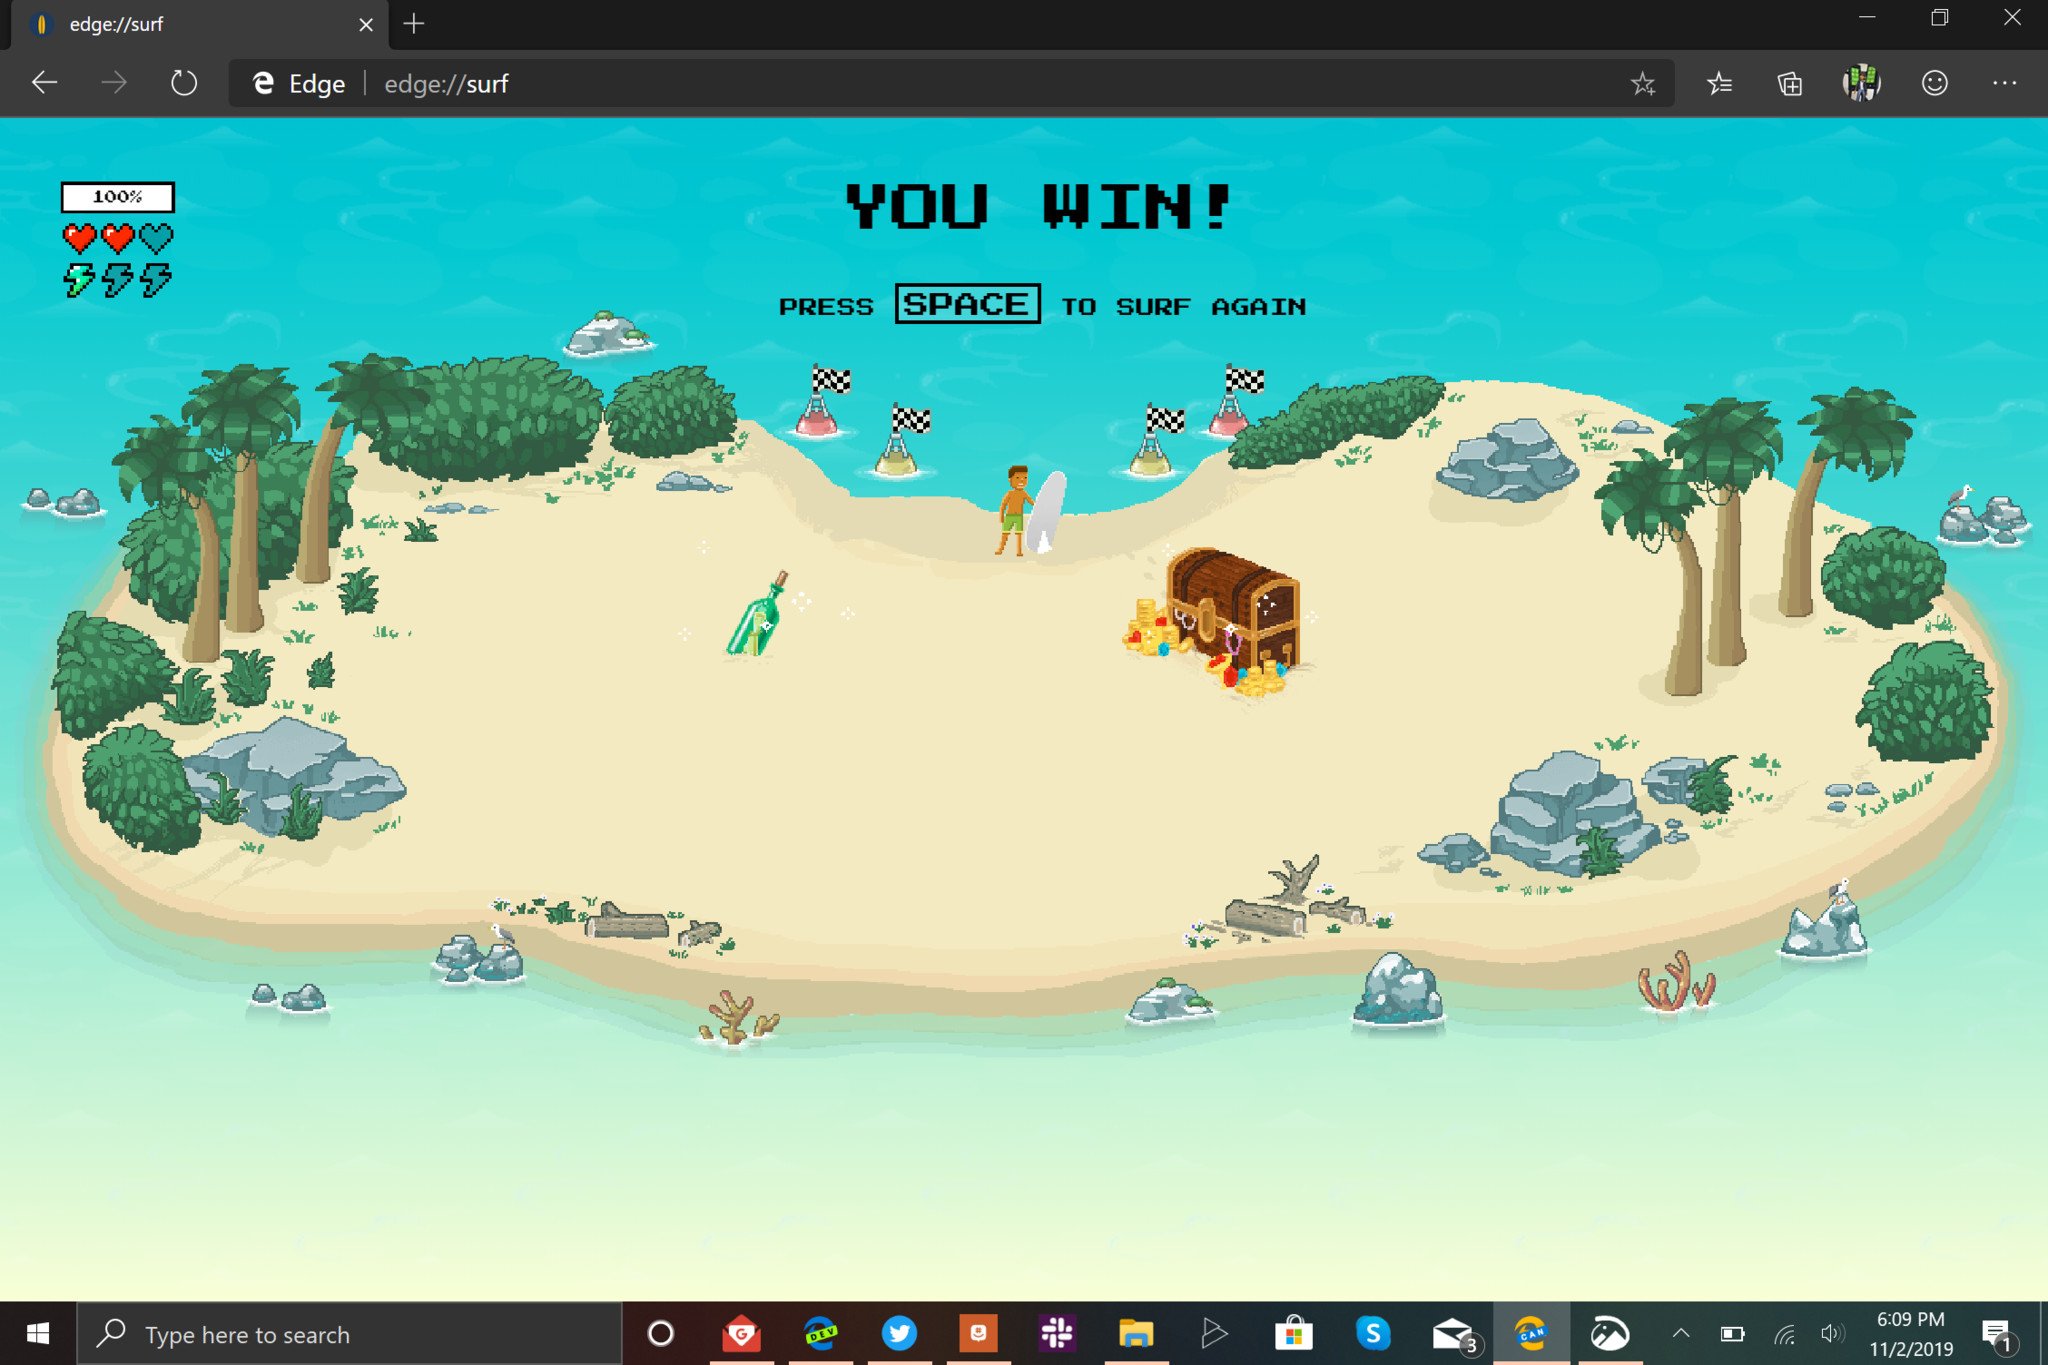 Microsoft Edge Surf game now available on Android for Canary channel users  - MSPoweruser